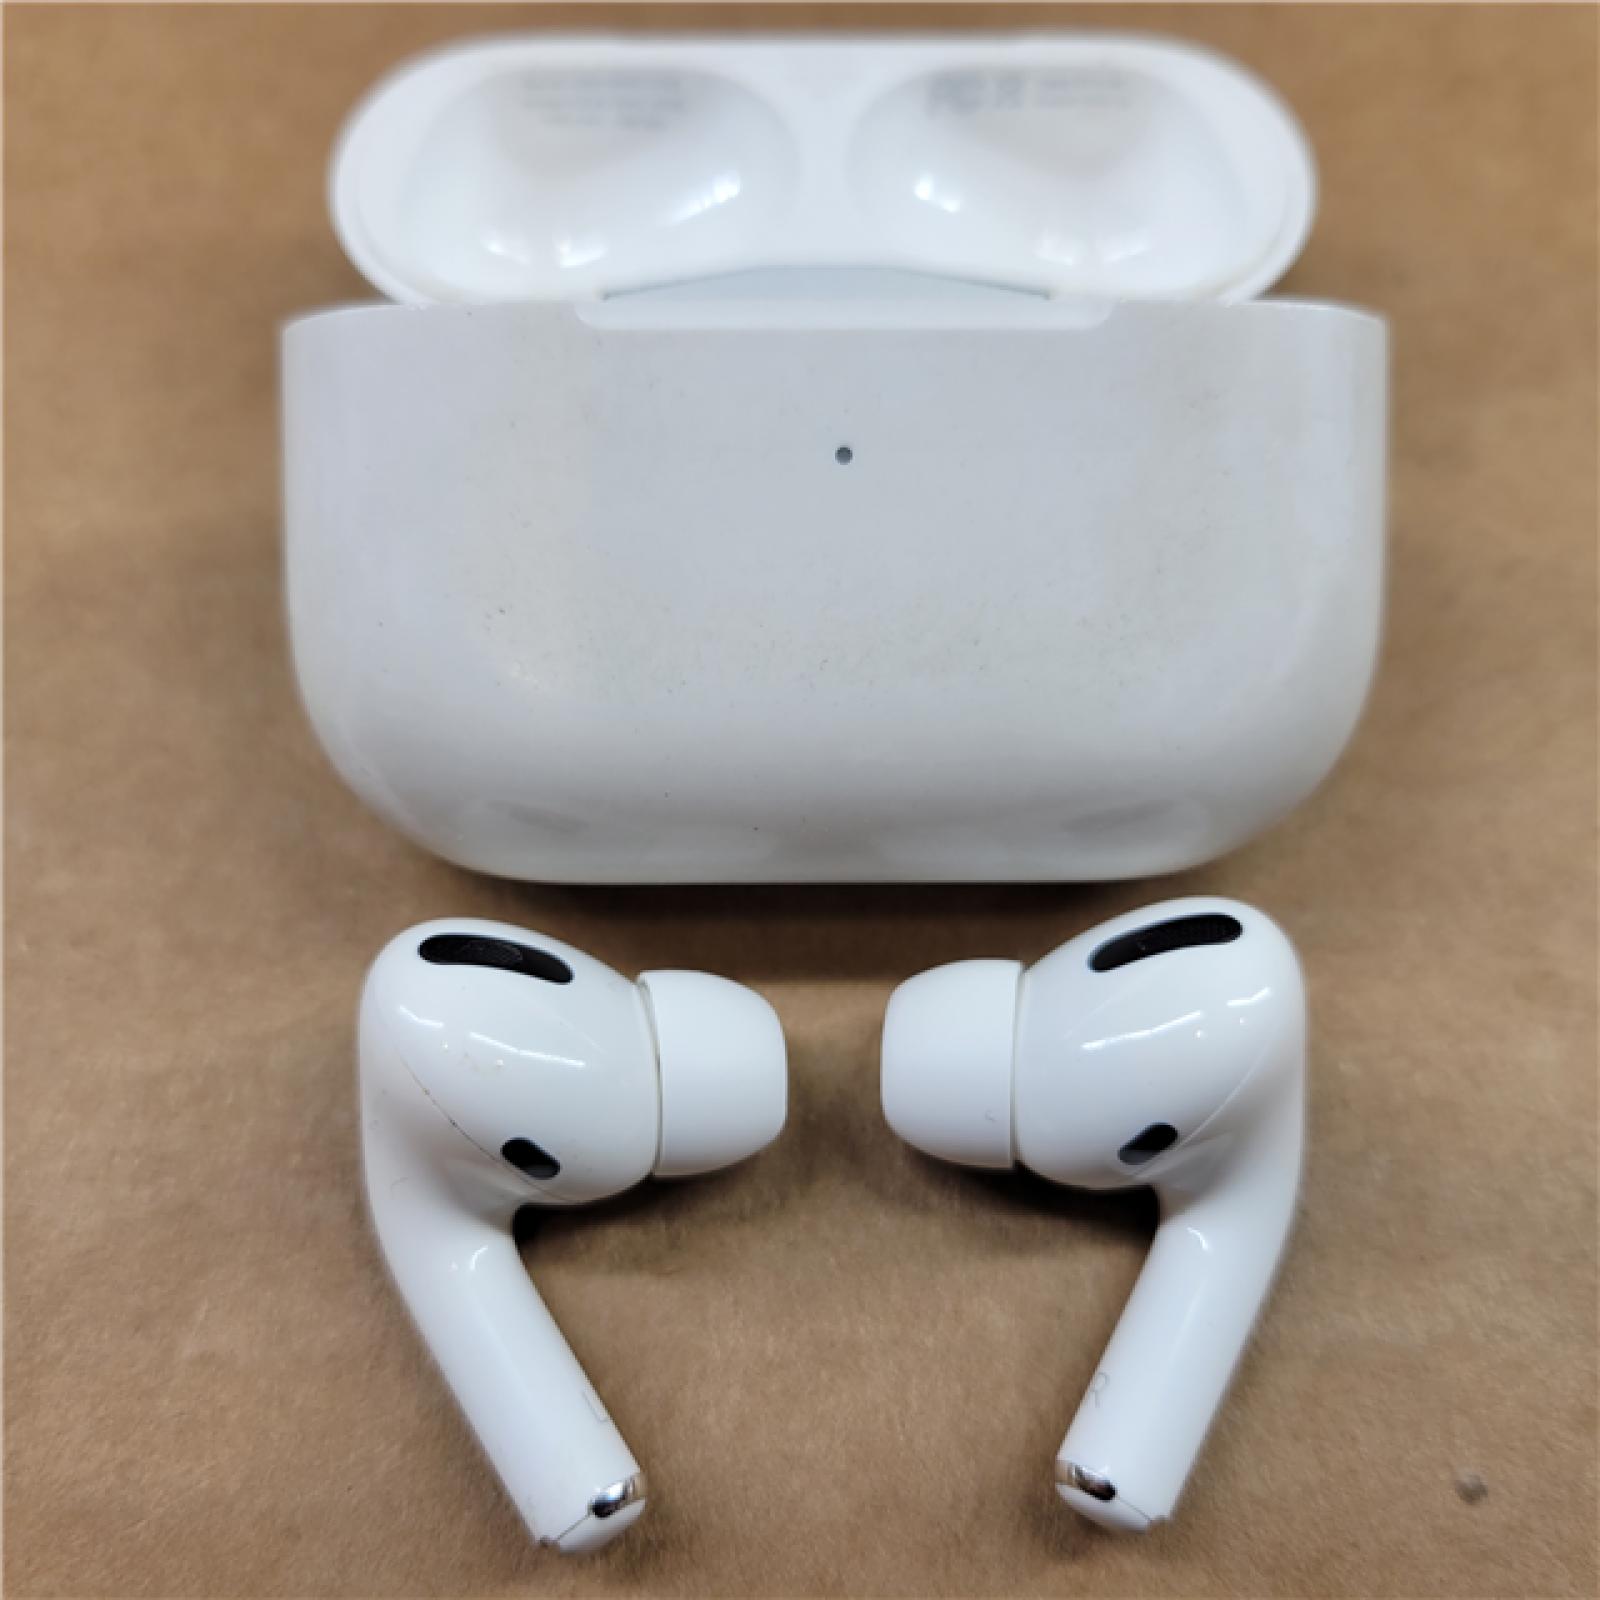 AS-IS Apple AirPods Pro